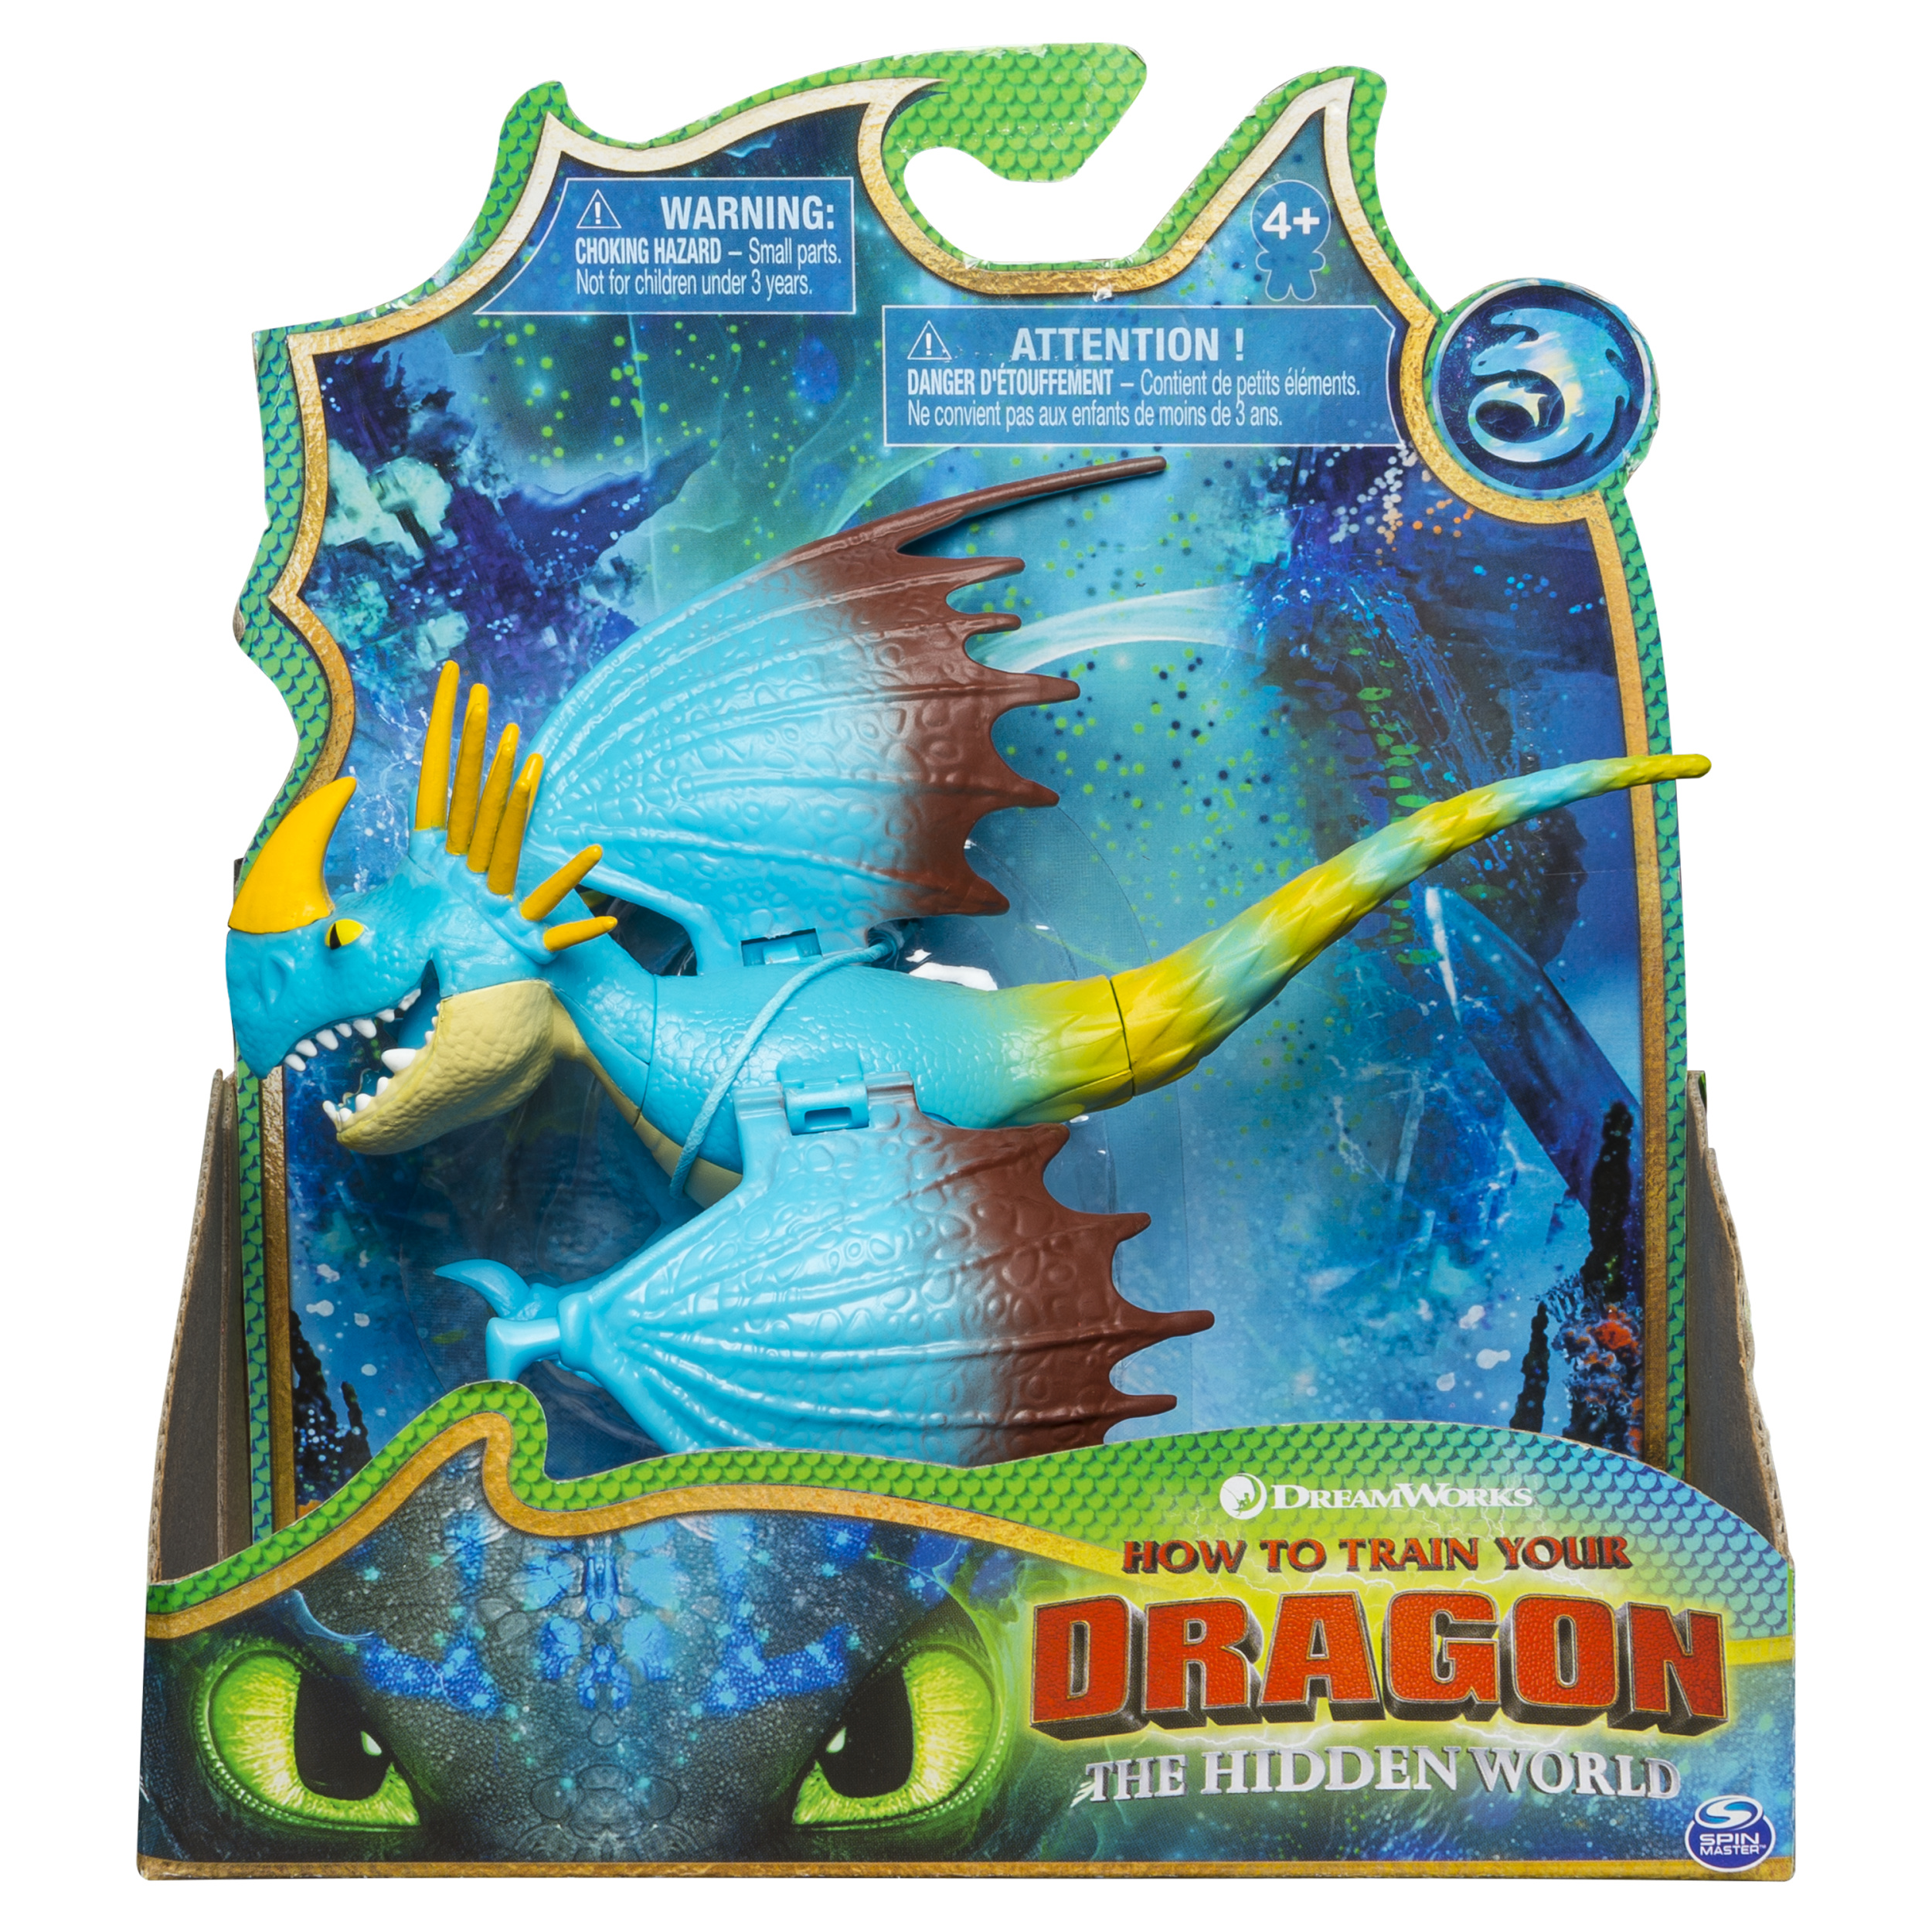 DreamWorks Dragons, Stormfly Dragon Figure with Moving Parts, for Kids Aged 4 and up - image 1 of 4